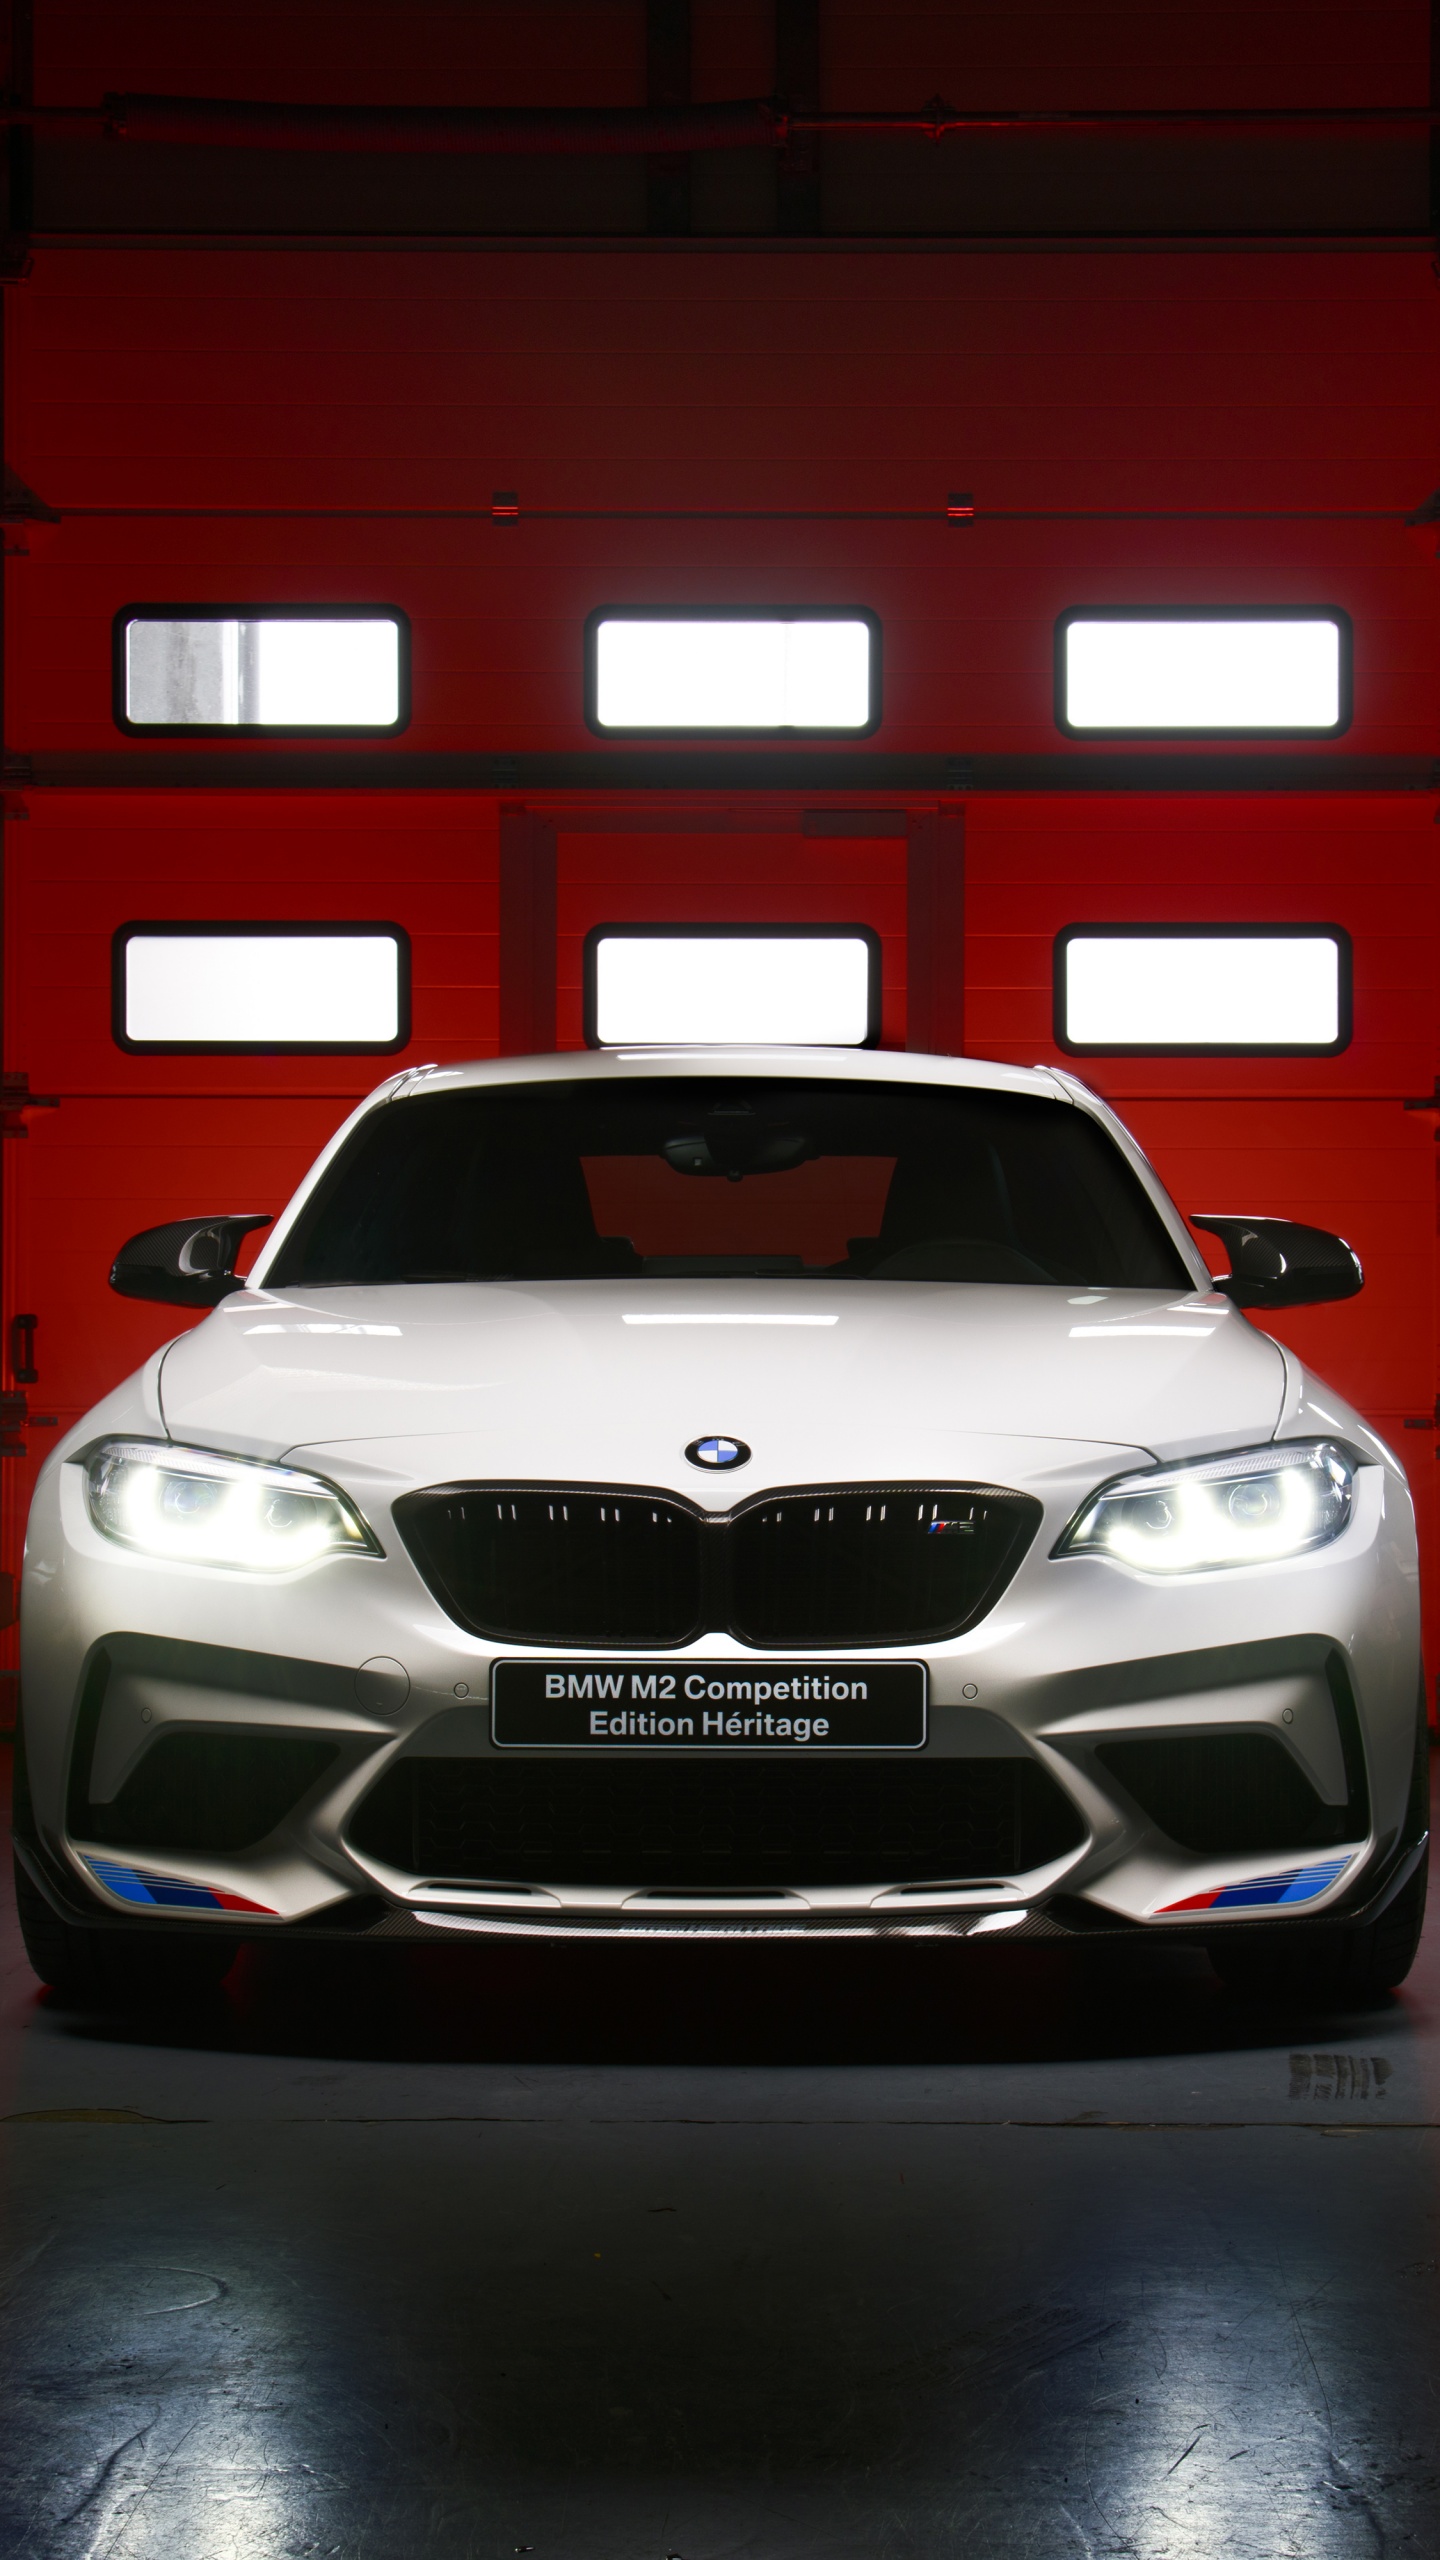 BMW M2 Competition Wallpaper 4K, Heritage Edition, 2019, 5K, Cars, #4